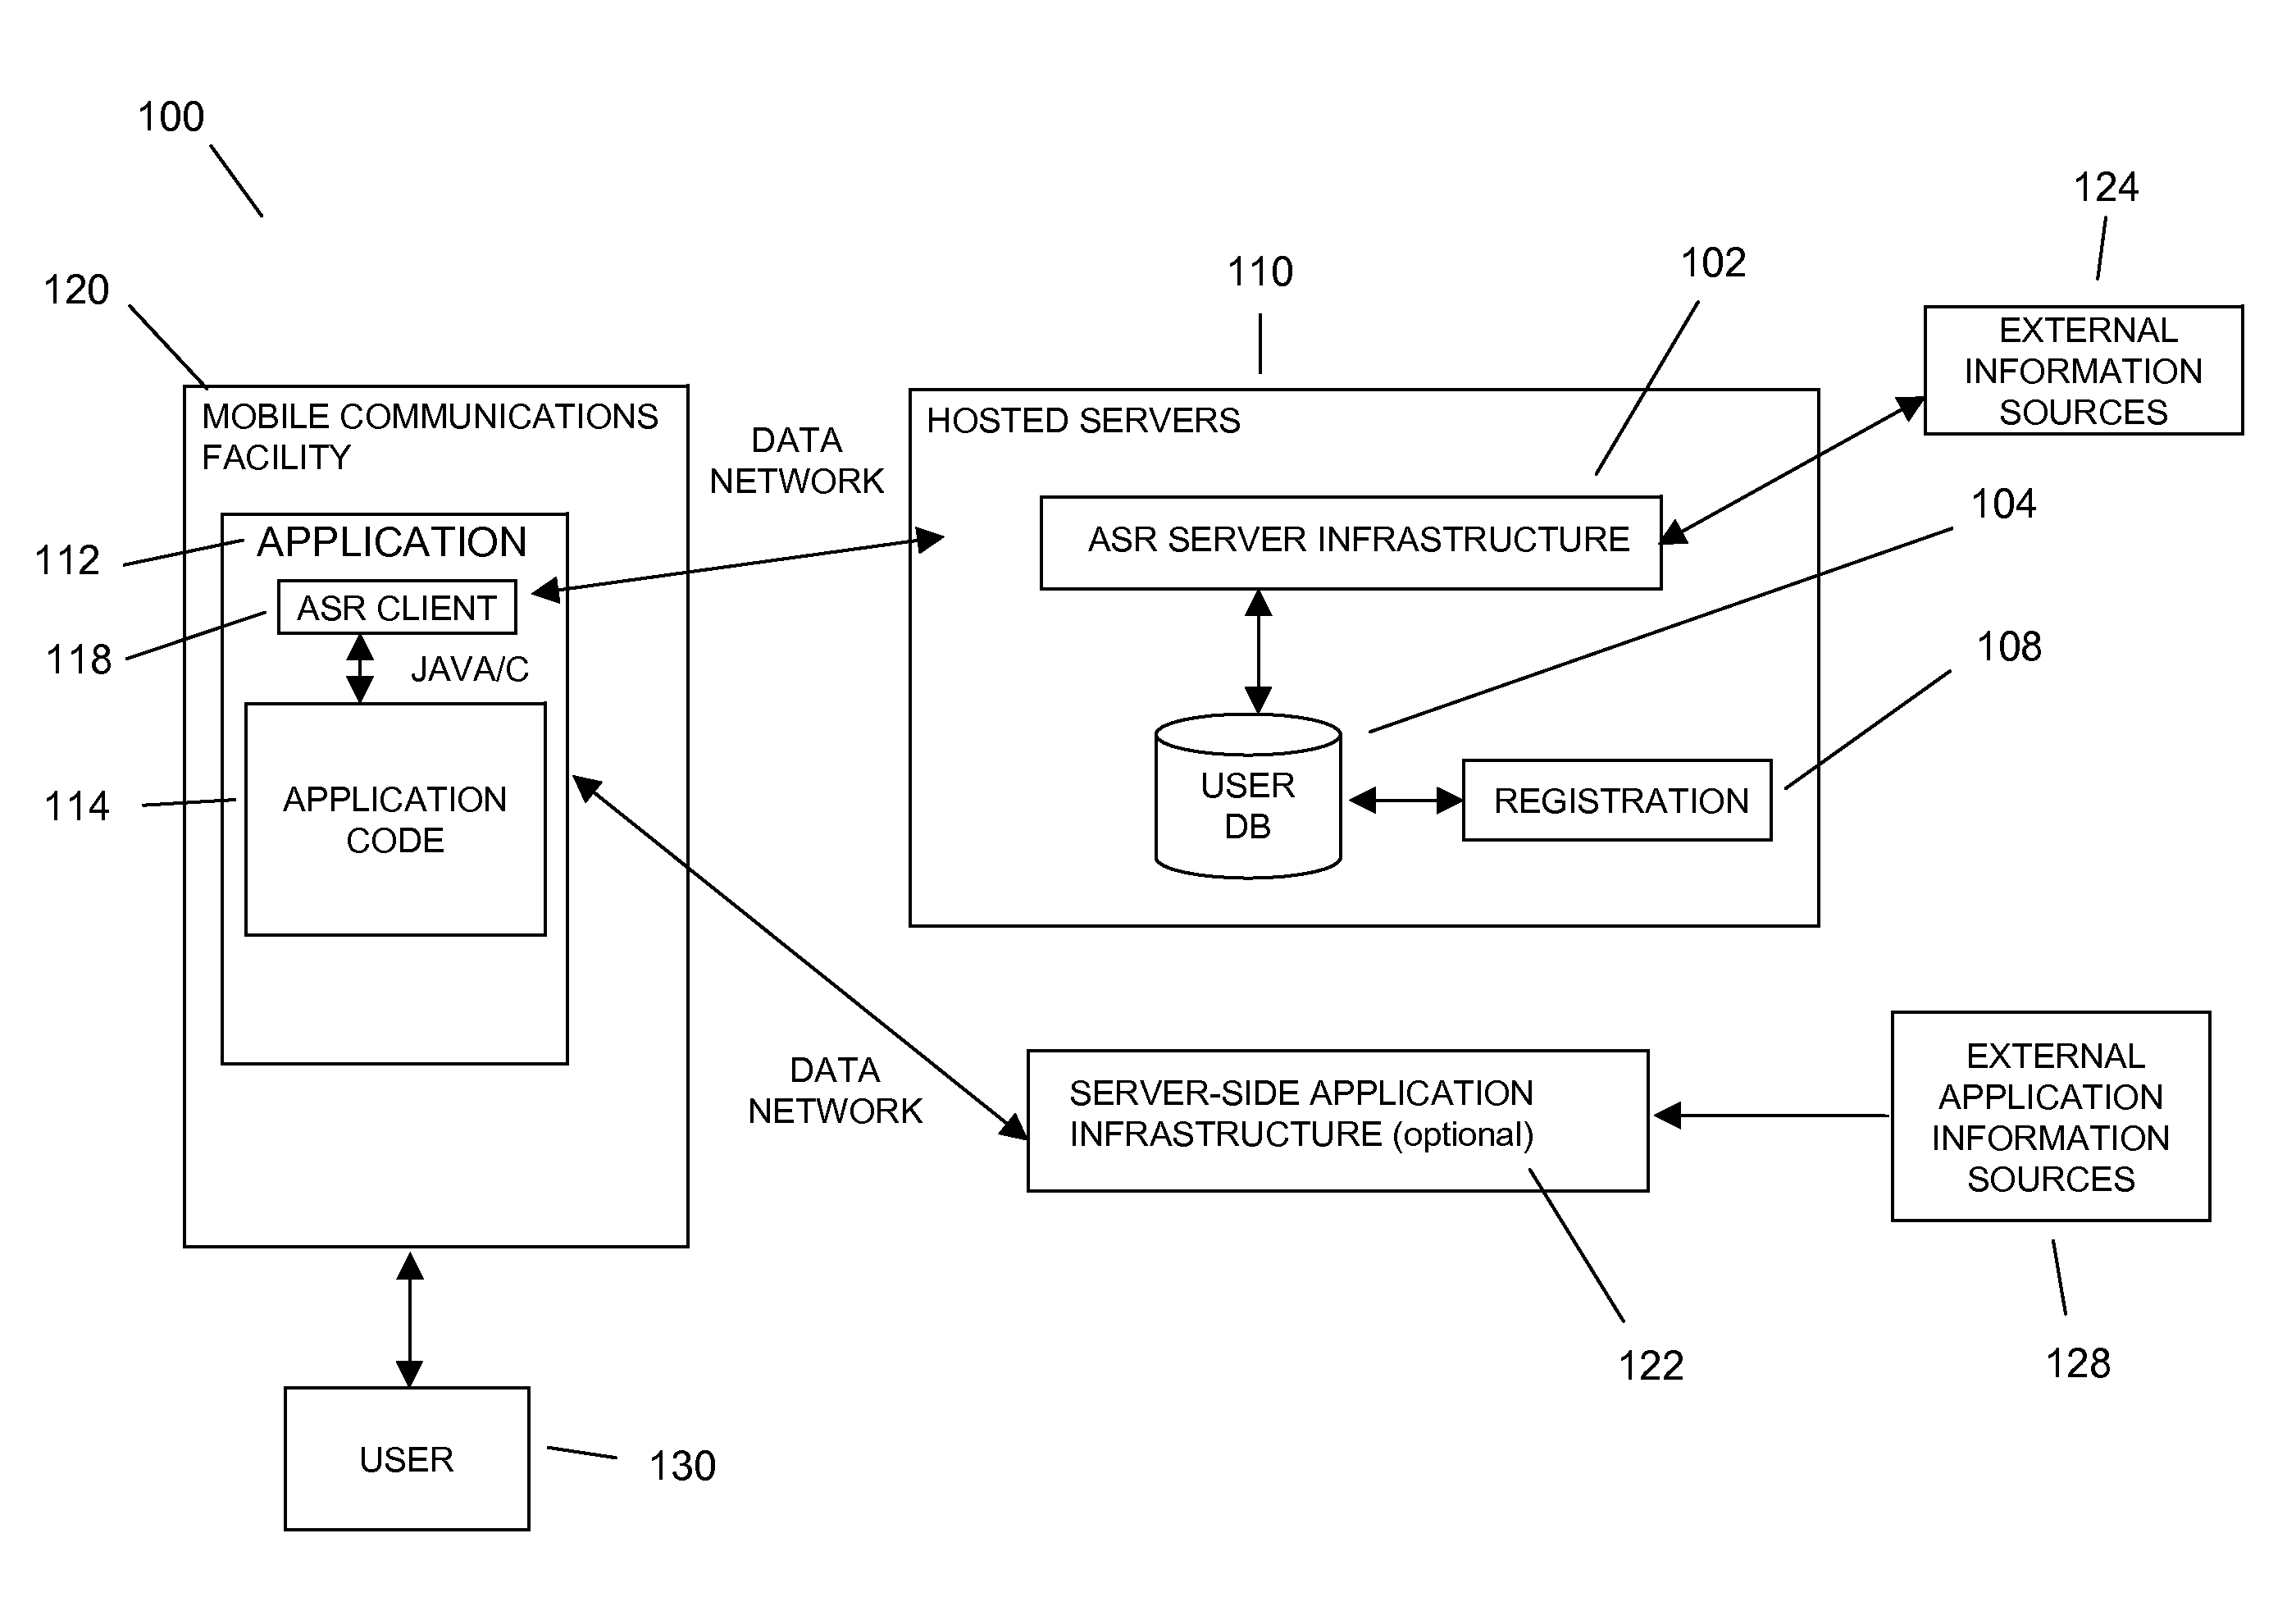 Command and control utilizing ancillary information in a mobile voice-to-speech application